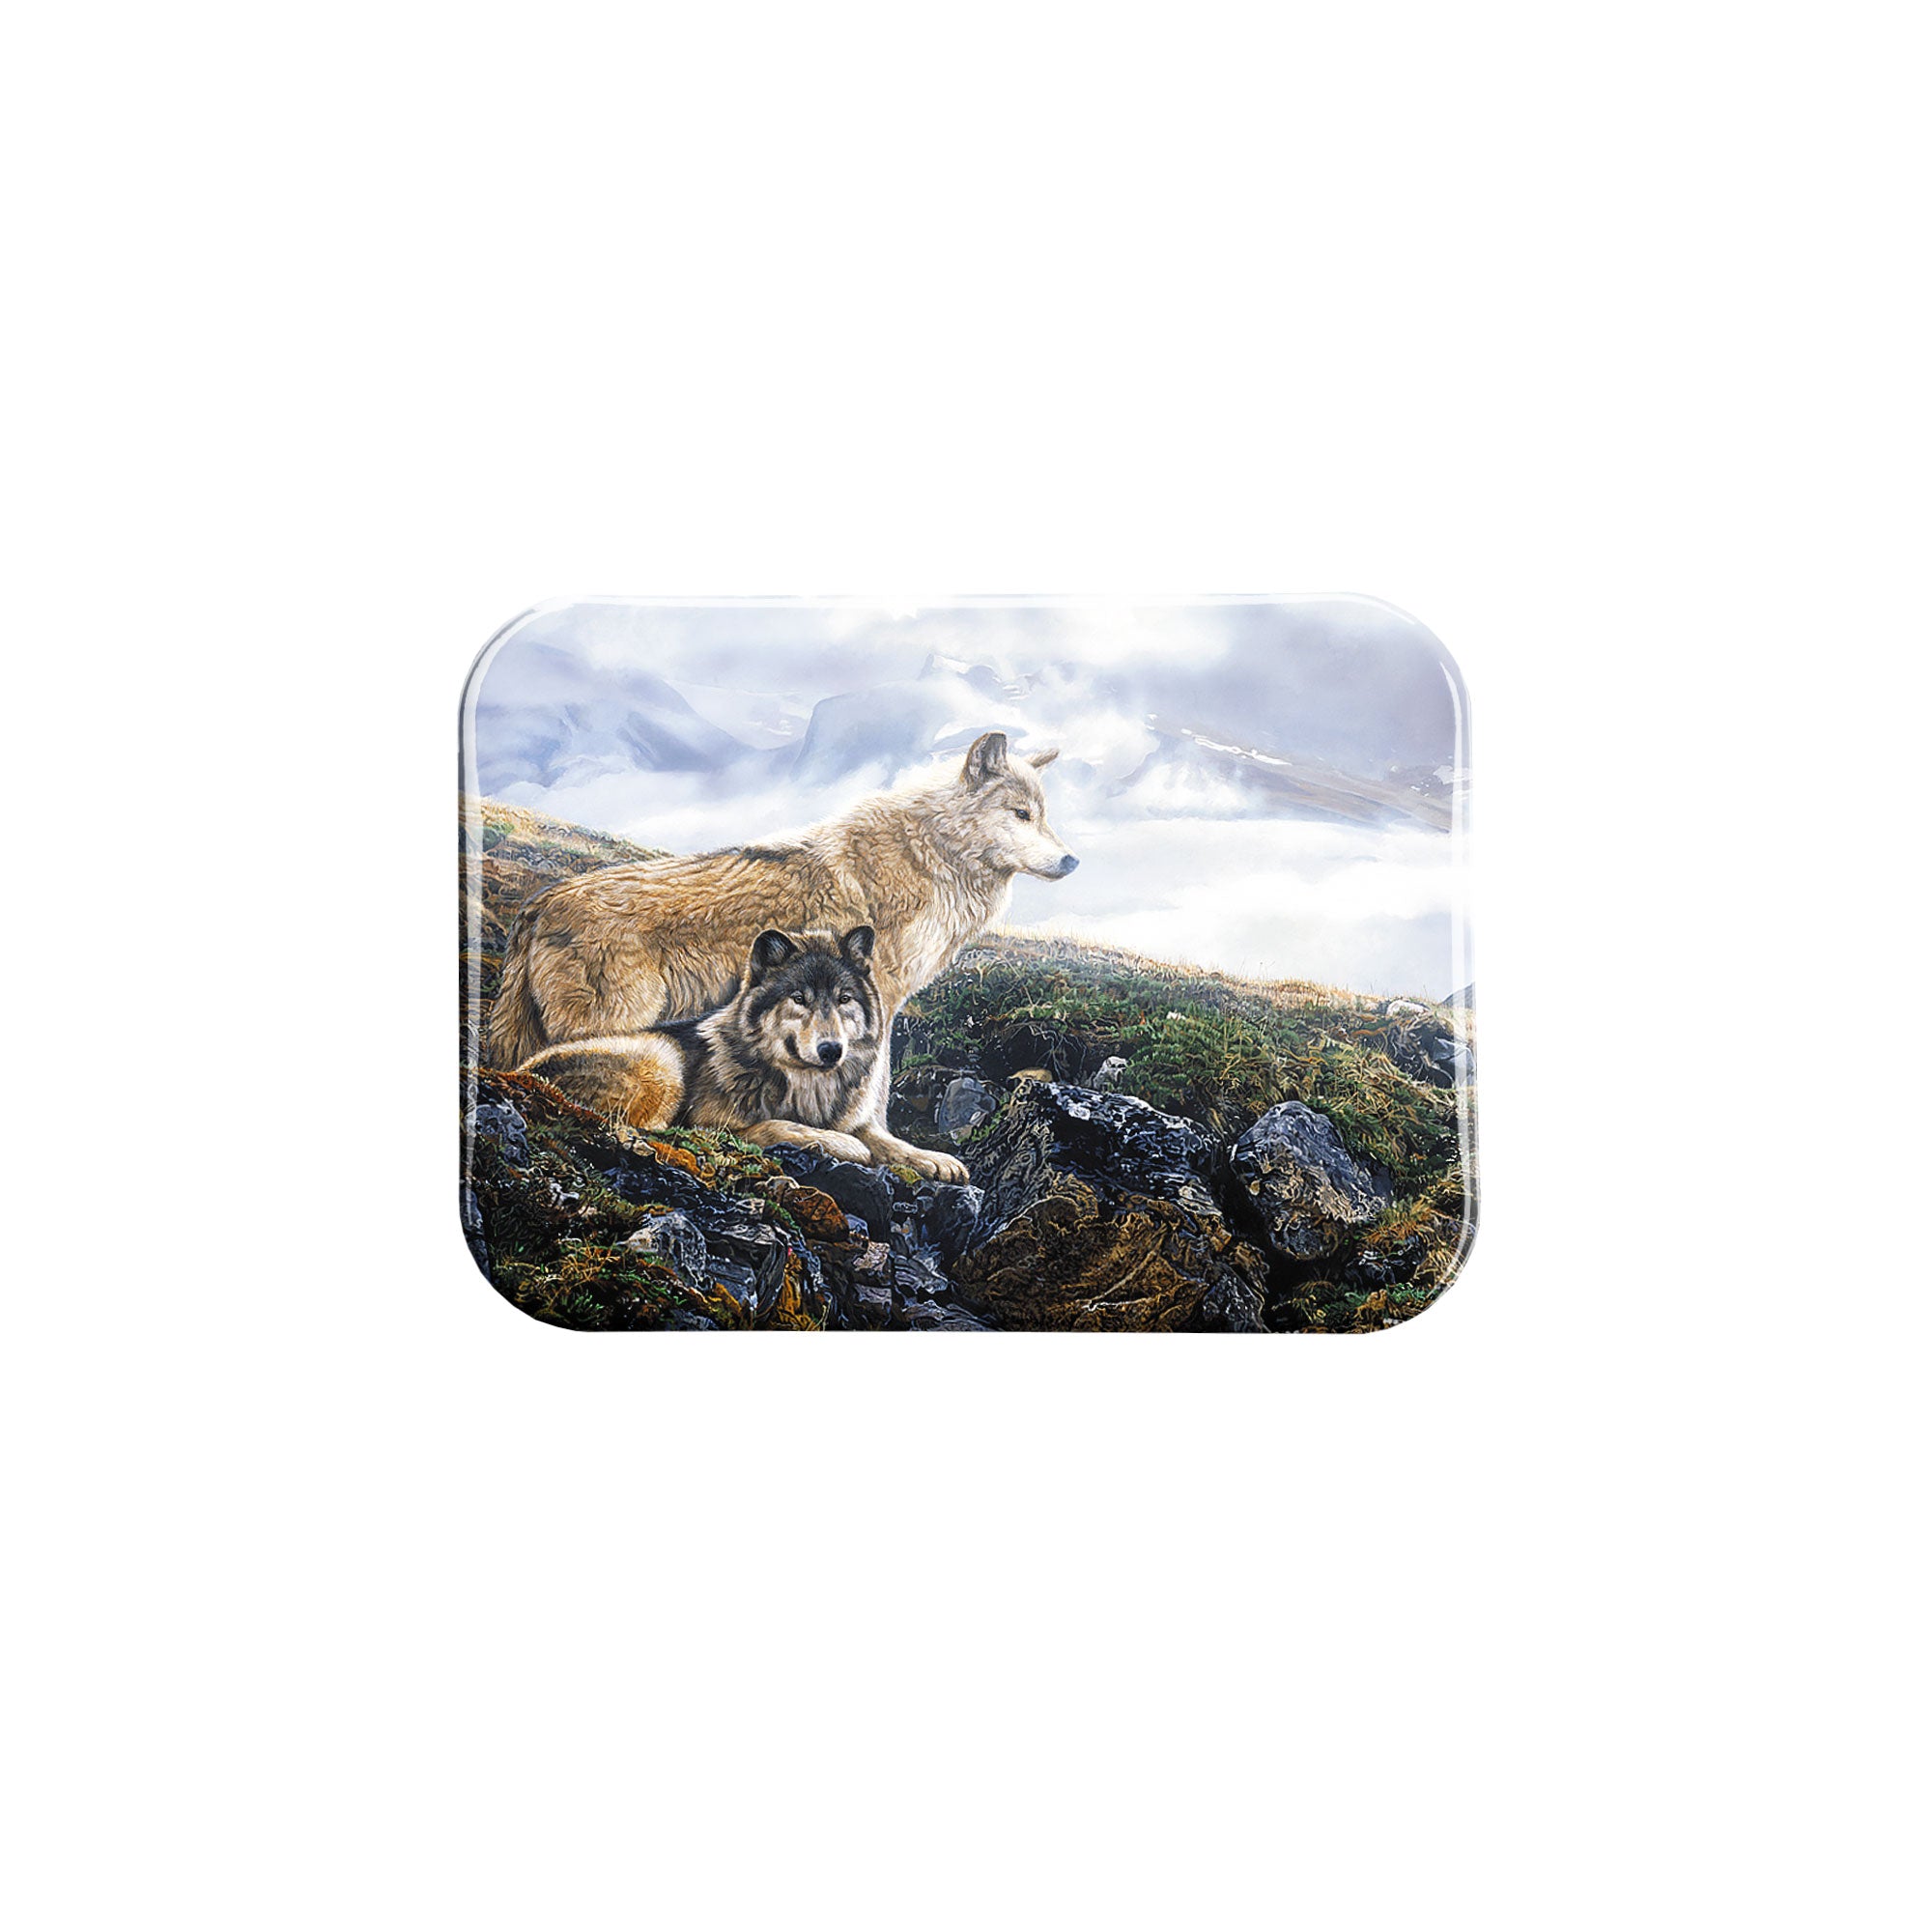 "Above Timberline" - 2.5" X 3.5" Rectangle Fridge Magnets